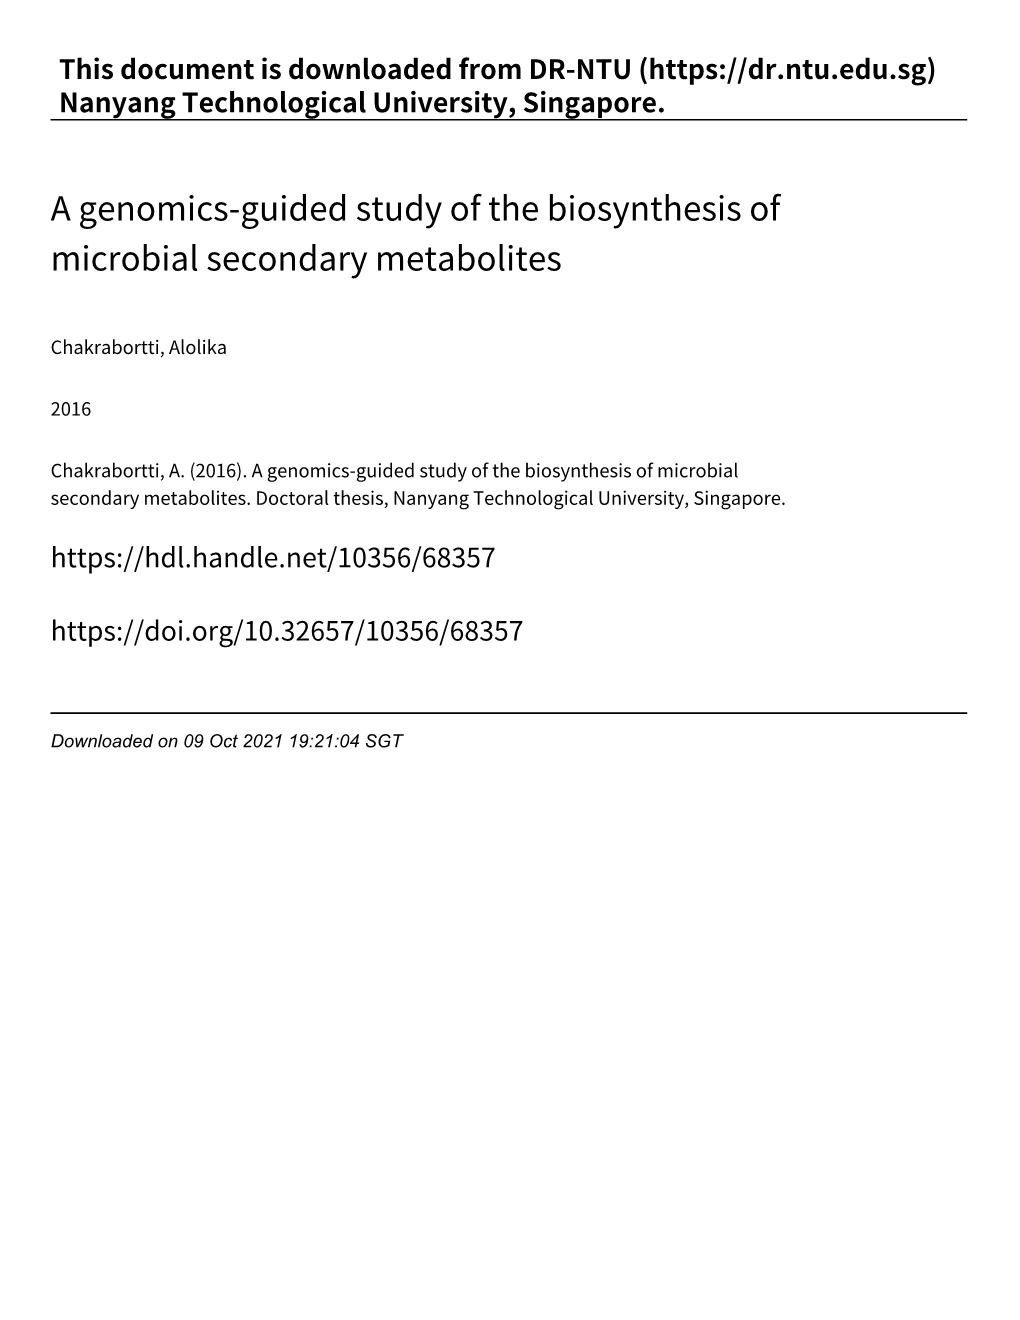 A Genomics‑Guided Study of the Biosynthesis of Microbial Secondary Metabolites